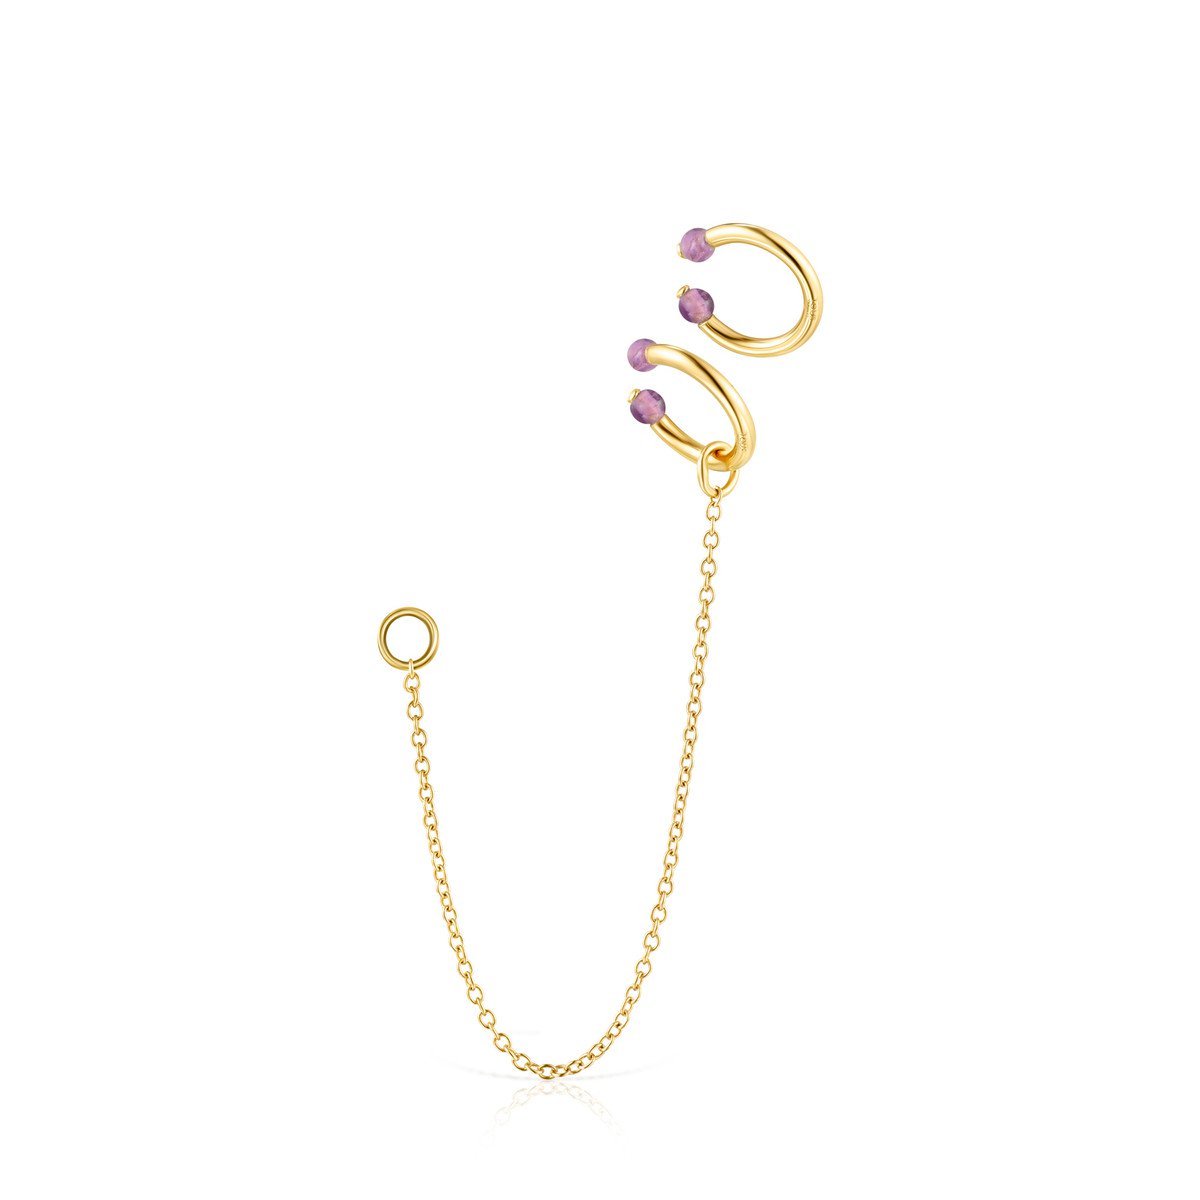 Tous Batala Earcuff Pack in Gold Vermeil with Amethyst 918543650